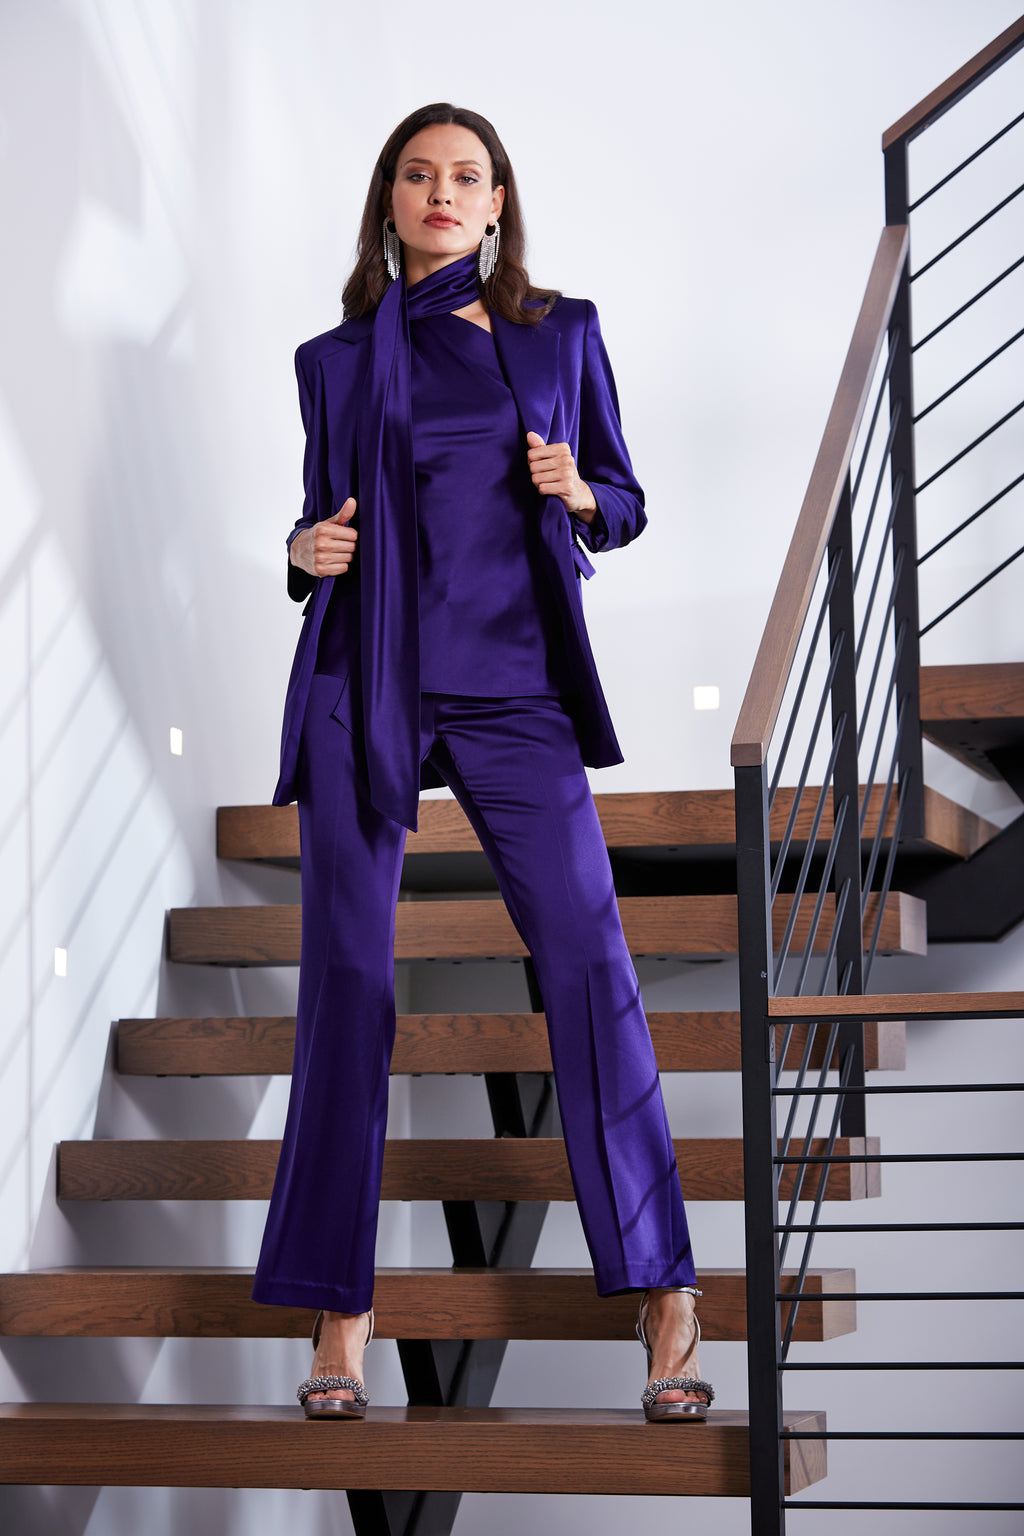 Formal Women Evening Suits, Misty Lane 13538 Womens Formal Evening Duster  Jacket Pant Su…